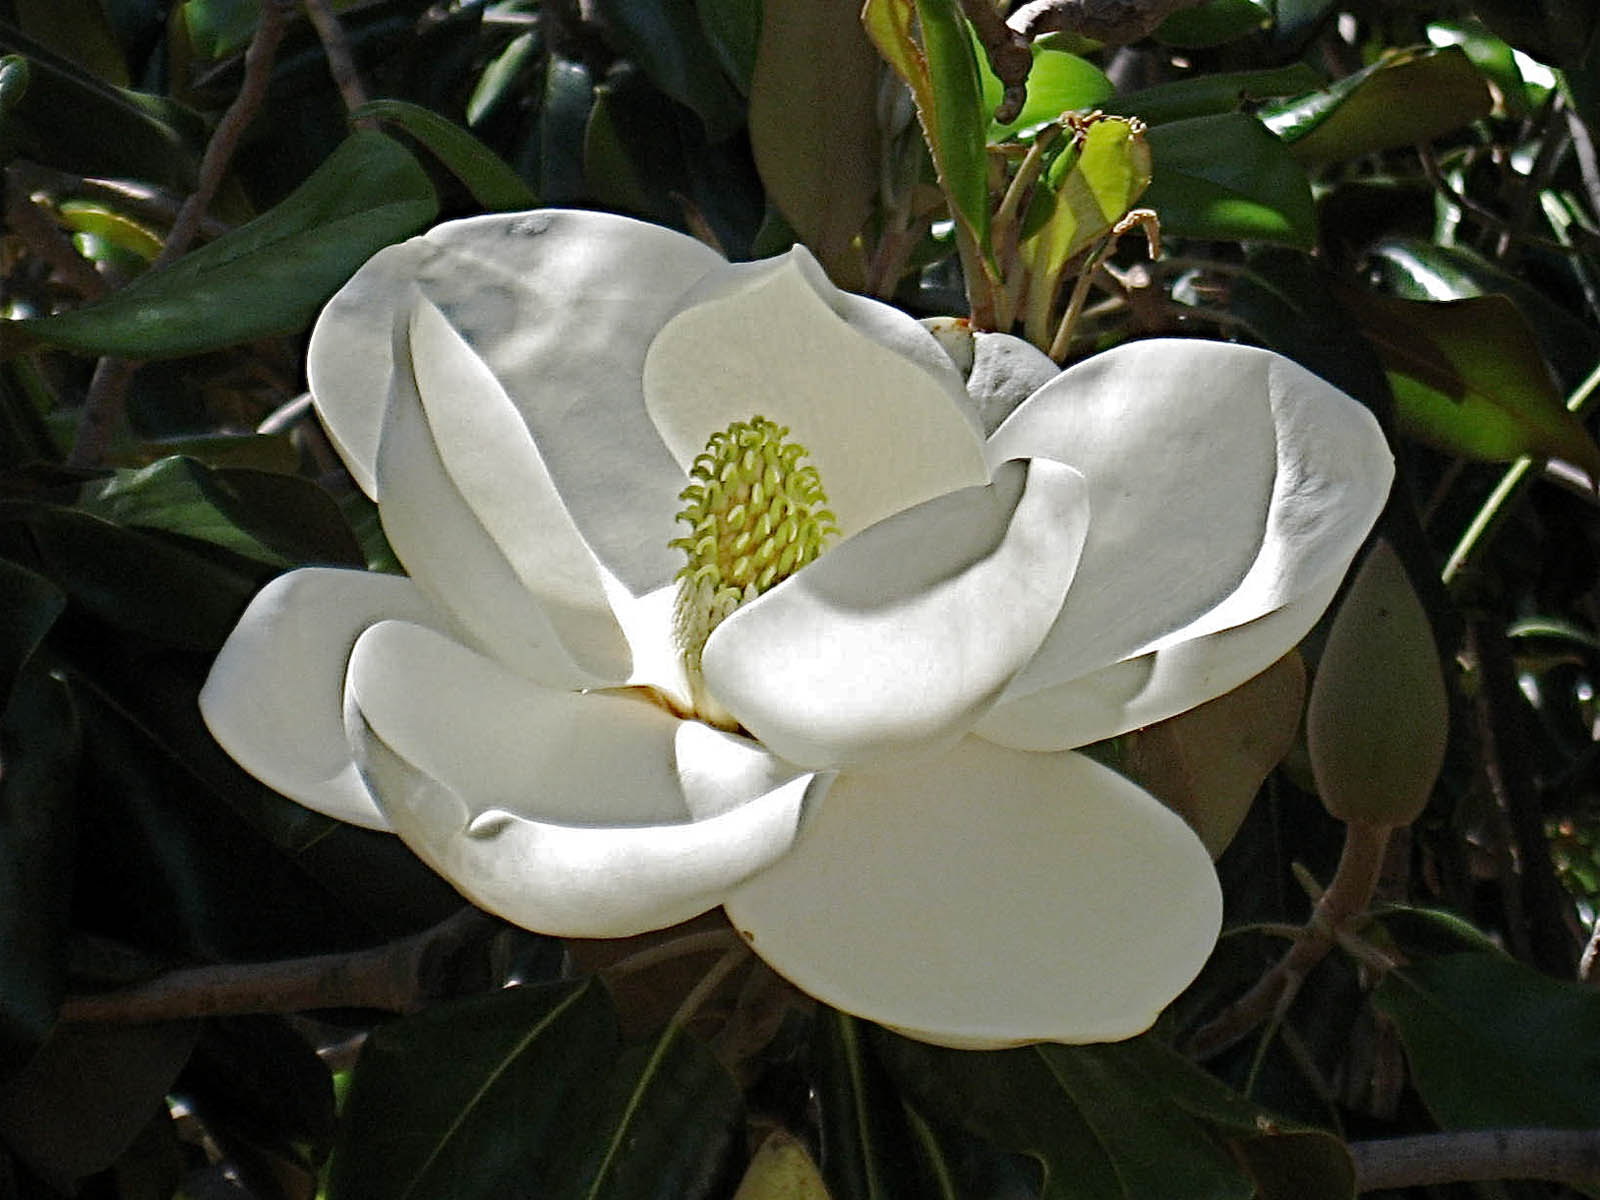 Magnolia Blossom Wallpaper Image Photos Pictures And Background